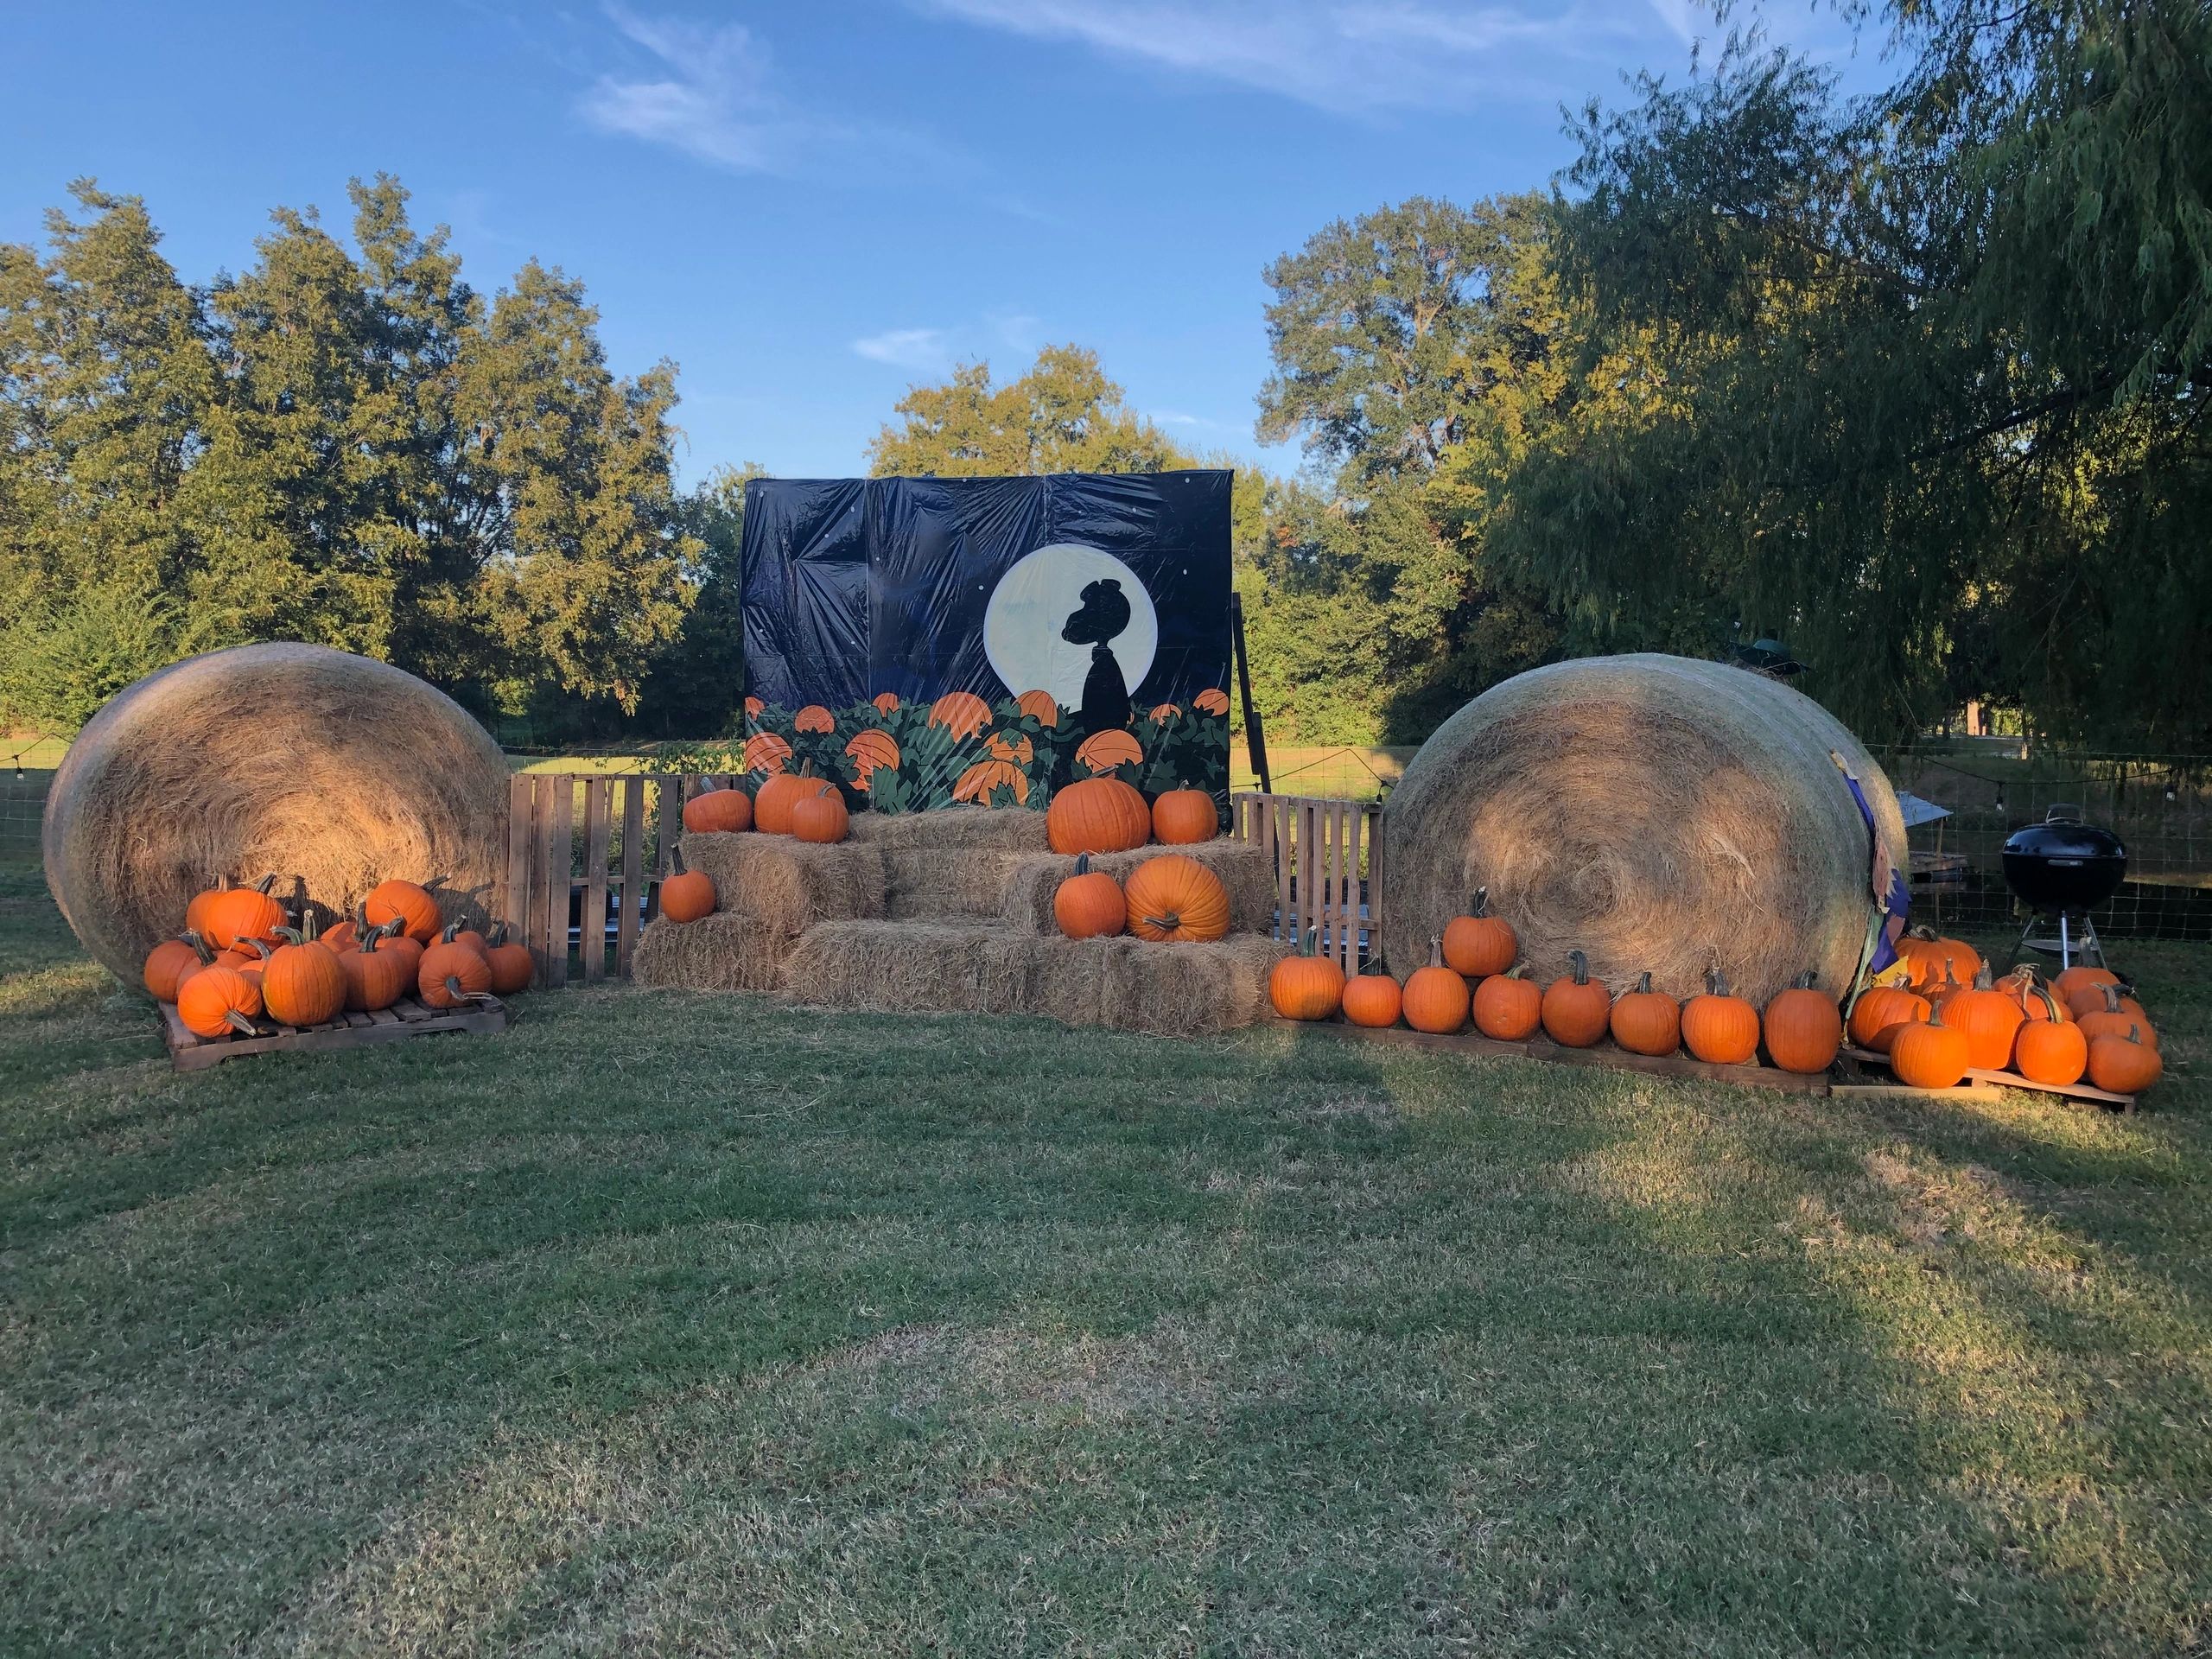 Pumpkin patch at edge general store
Come by for a home style meal and walk through our pumpkin patch